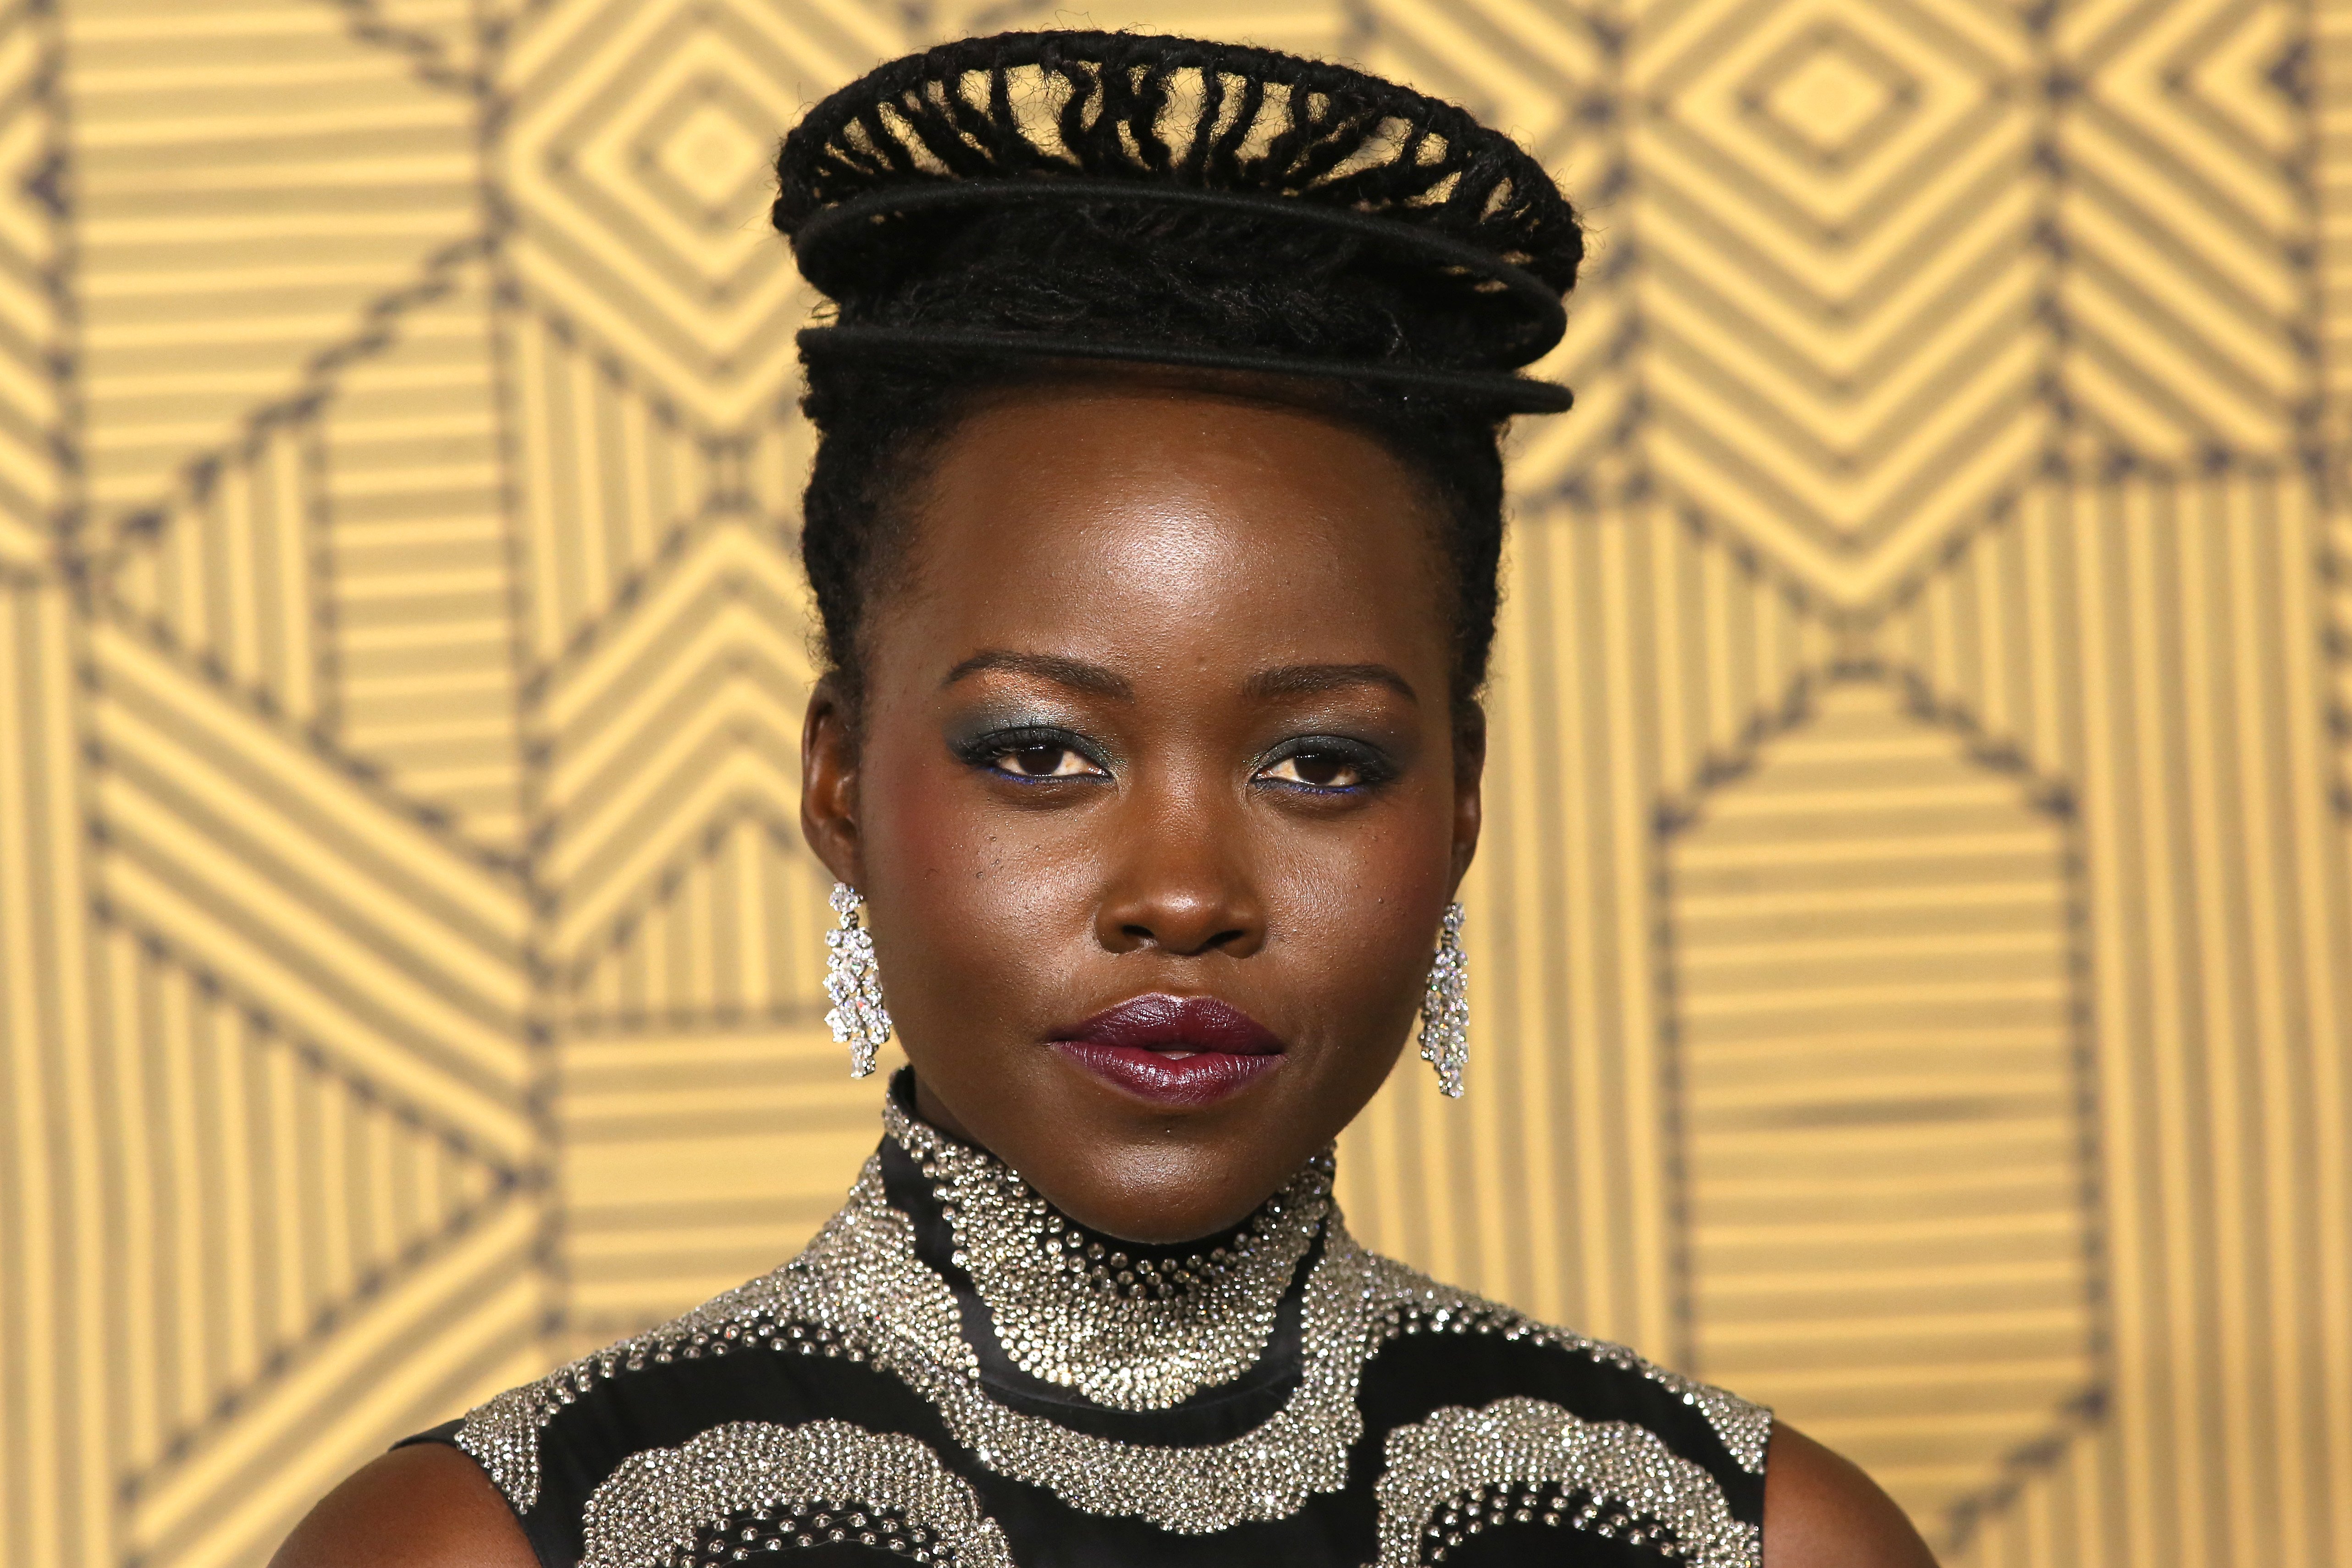 Lupita Nyong’o at the "Black Panther: Wakanda Forever" European premiere in November, 2022, in London, England. | Source: Getty Images